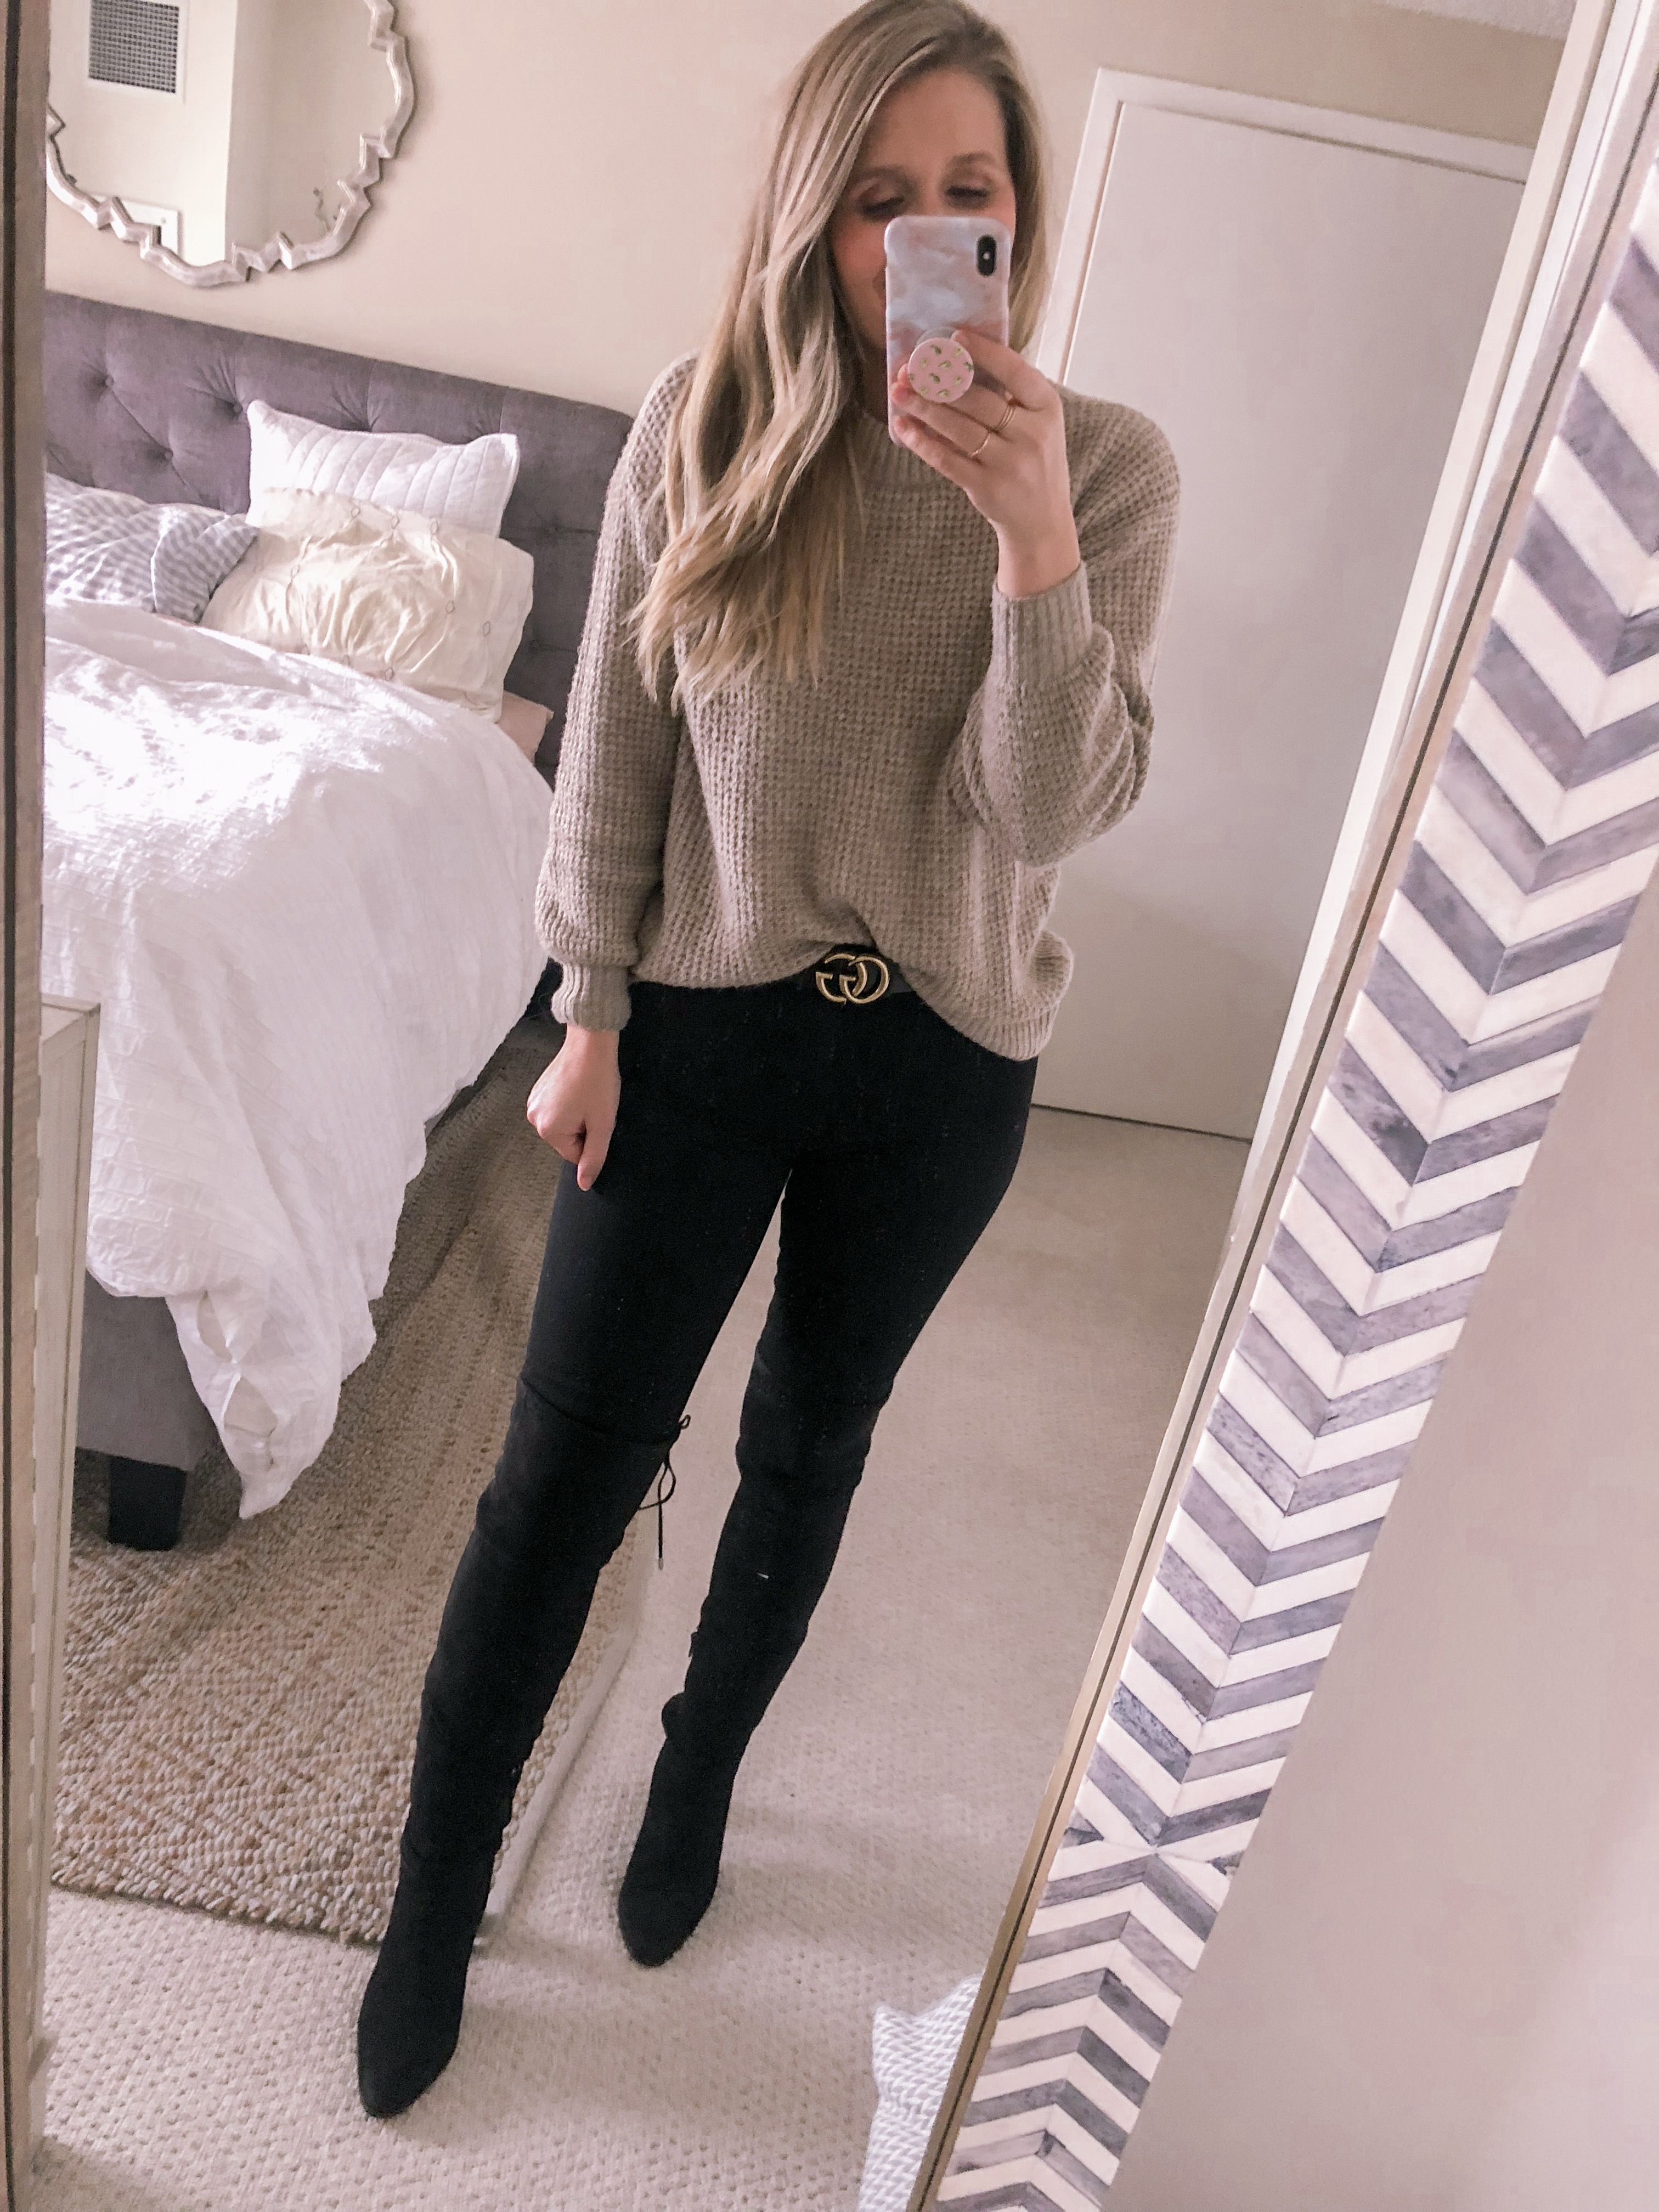 Popular Chicago fashion blogger Visions of Vogue wears the best waffle knit sweater, black skinny jeans, and black over the knee boots for a stylish work outfit.